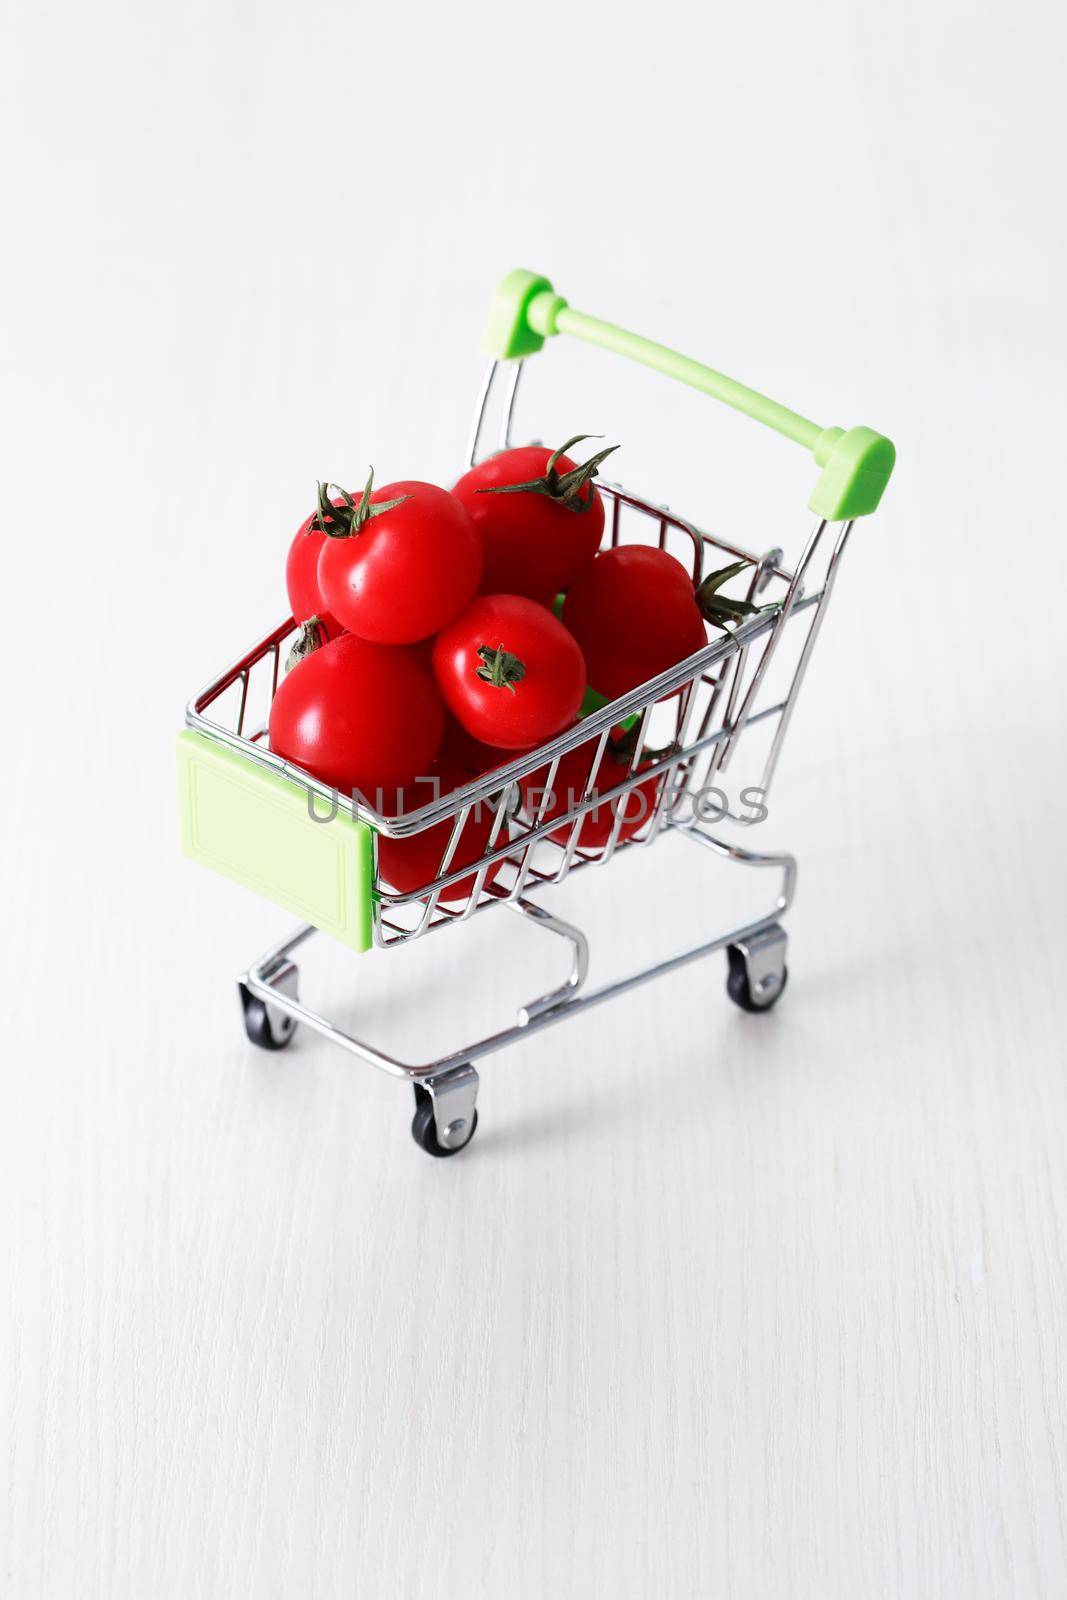 Shopping Cart With Tomatoes by kvkirillov